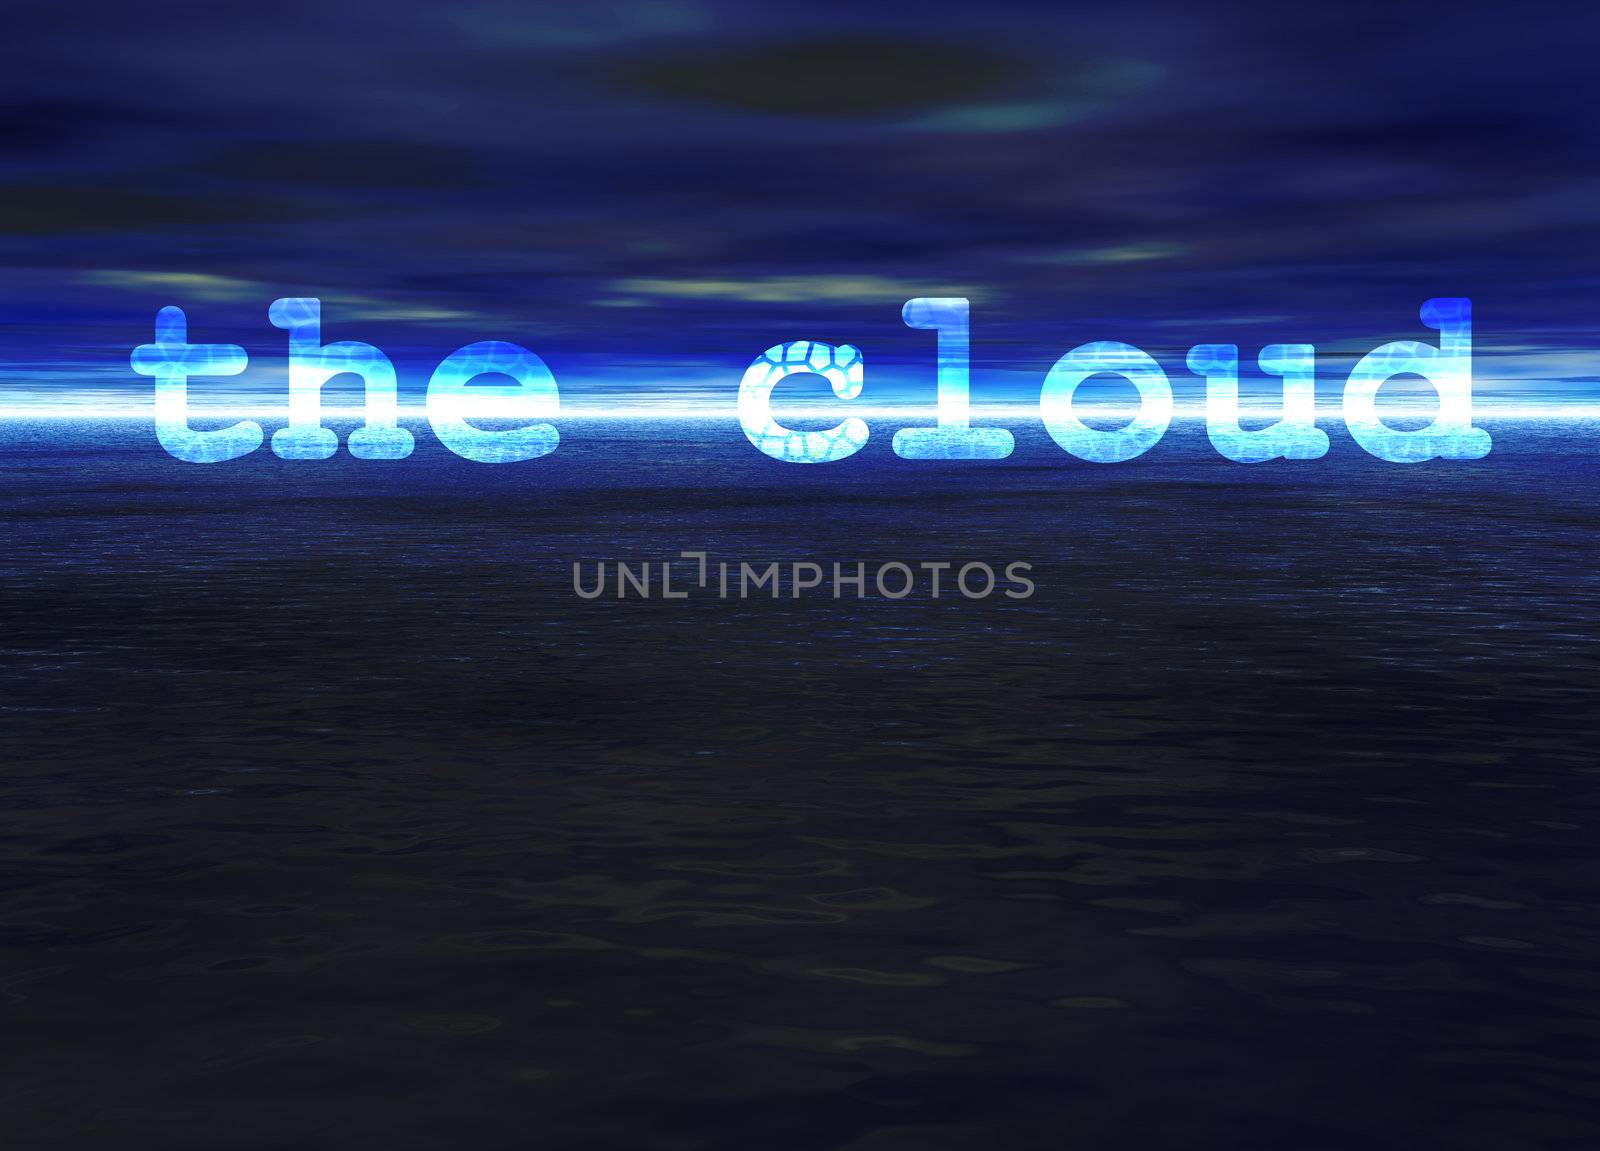 The Cloud Text on Stunning Blue Bright Ocean Sea Horizon at Nigh by bobbigmac